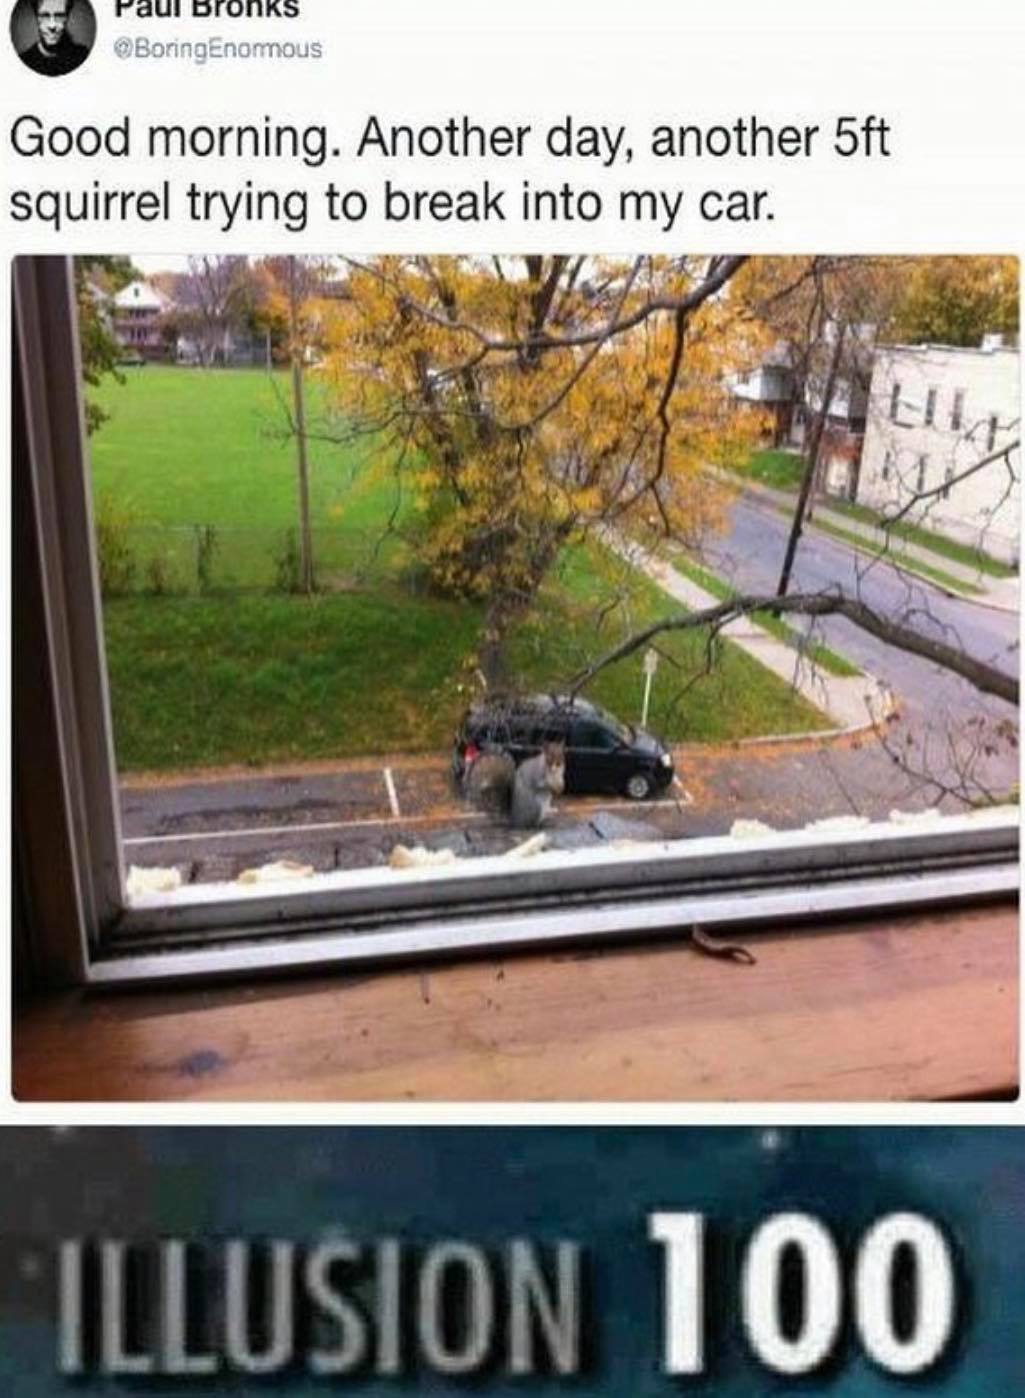 illusion 100 memes - BoringEnomous Good morning. Another day, another 5ft squirrel trying to break into my car. Hea Illusion 100